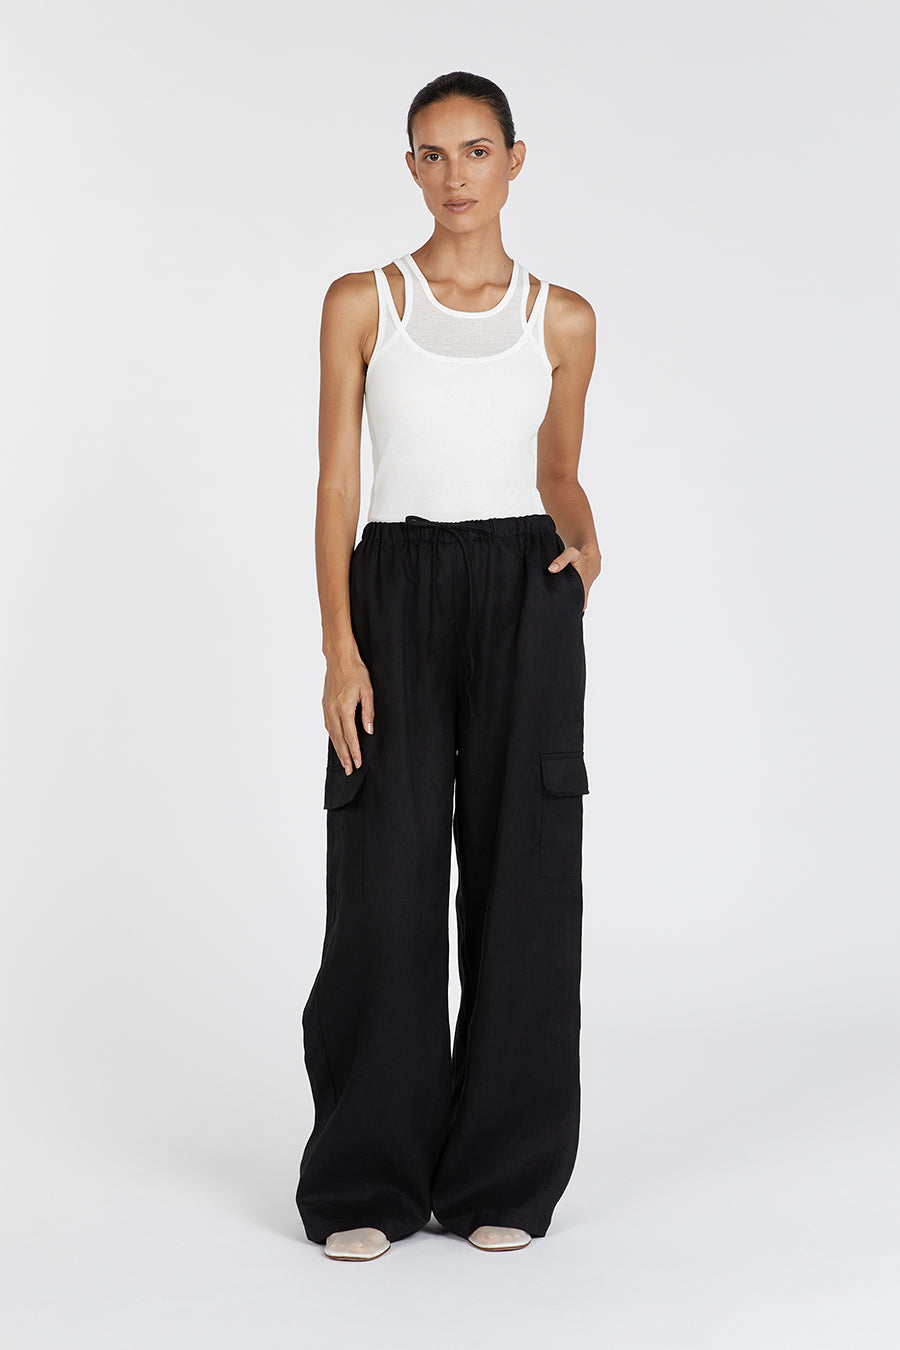 Wide Leg Palazzo pants for women Summer Solid Linen Casual Loose Long Pants  Elastic Waisted Trousers with Pockets Belt - Walmart.com